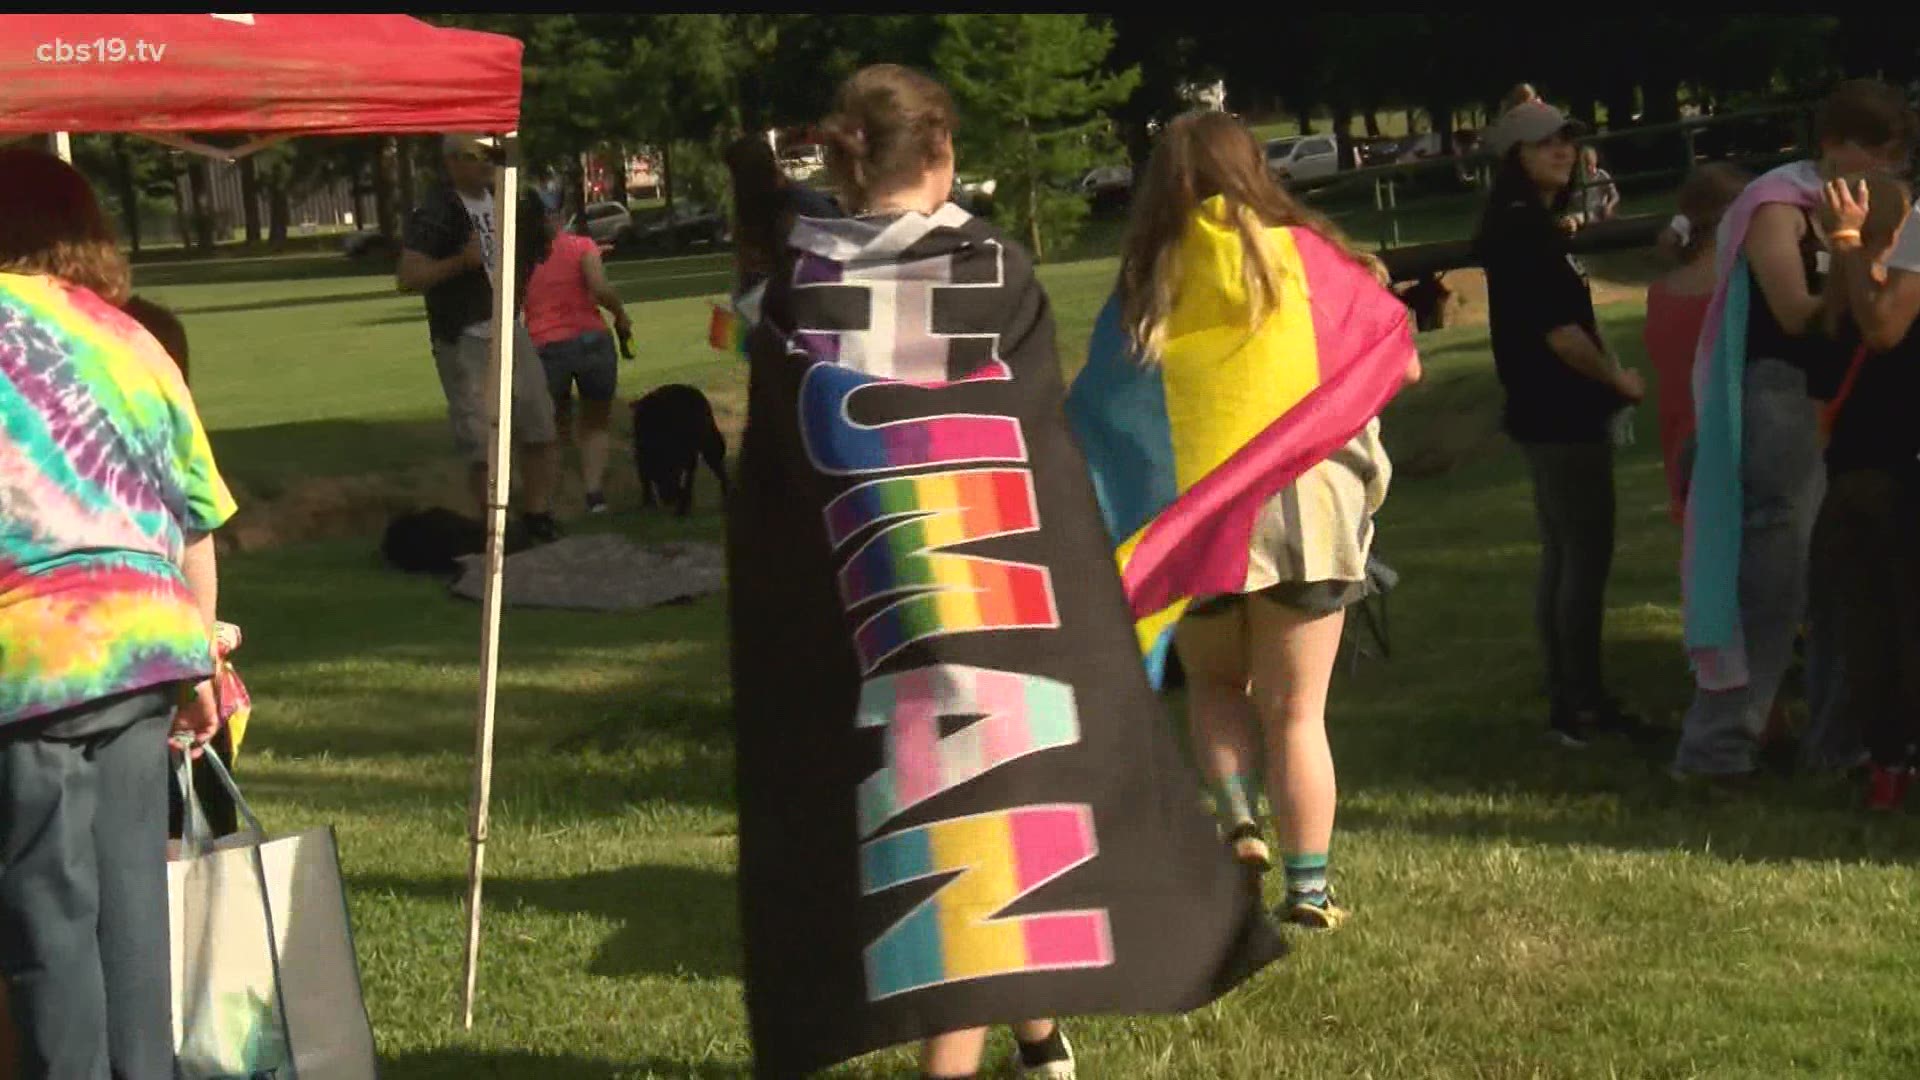 Live Out Loud pride event in Longview draws hundreds cbs19.tv